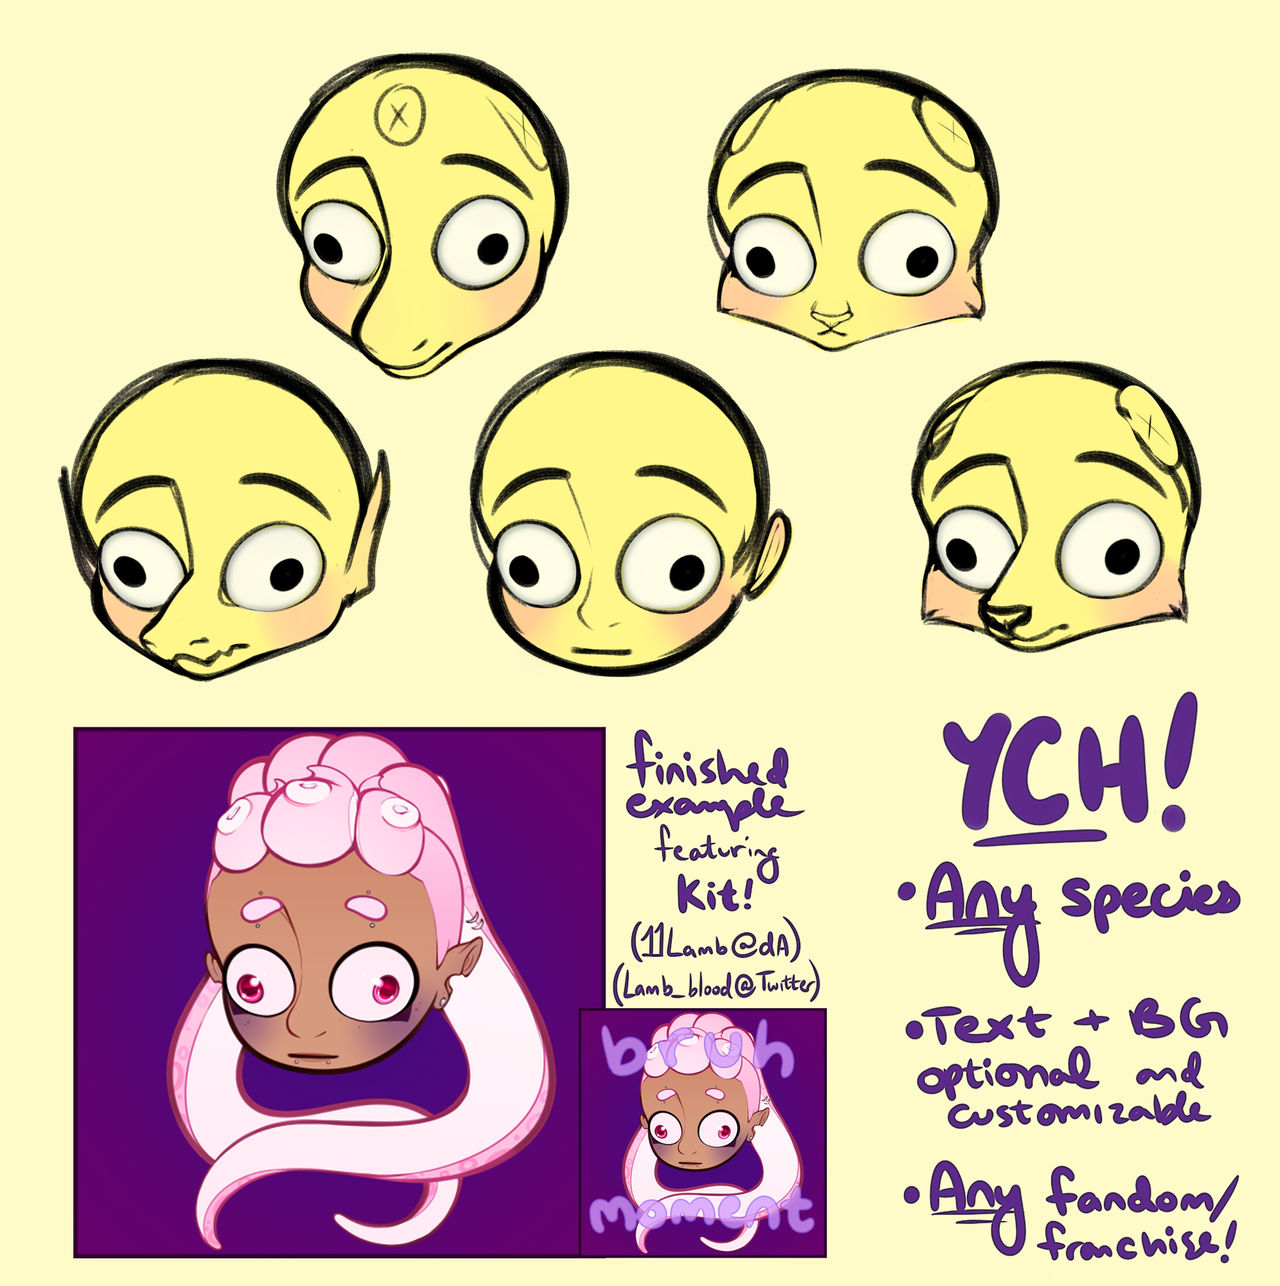 YCH - Cursed emojis - YCH.Commishes